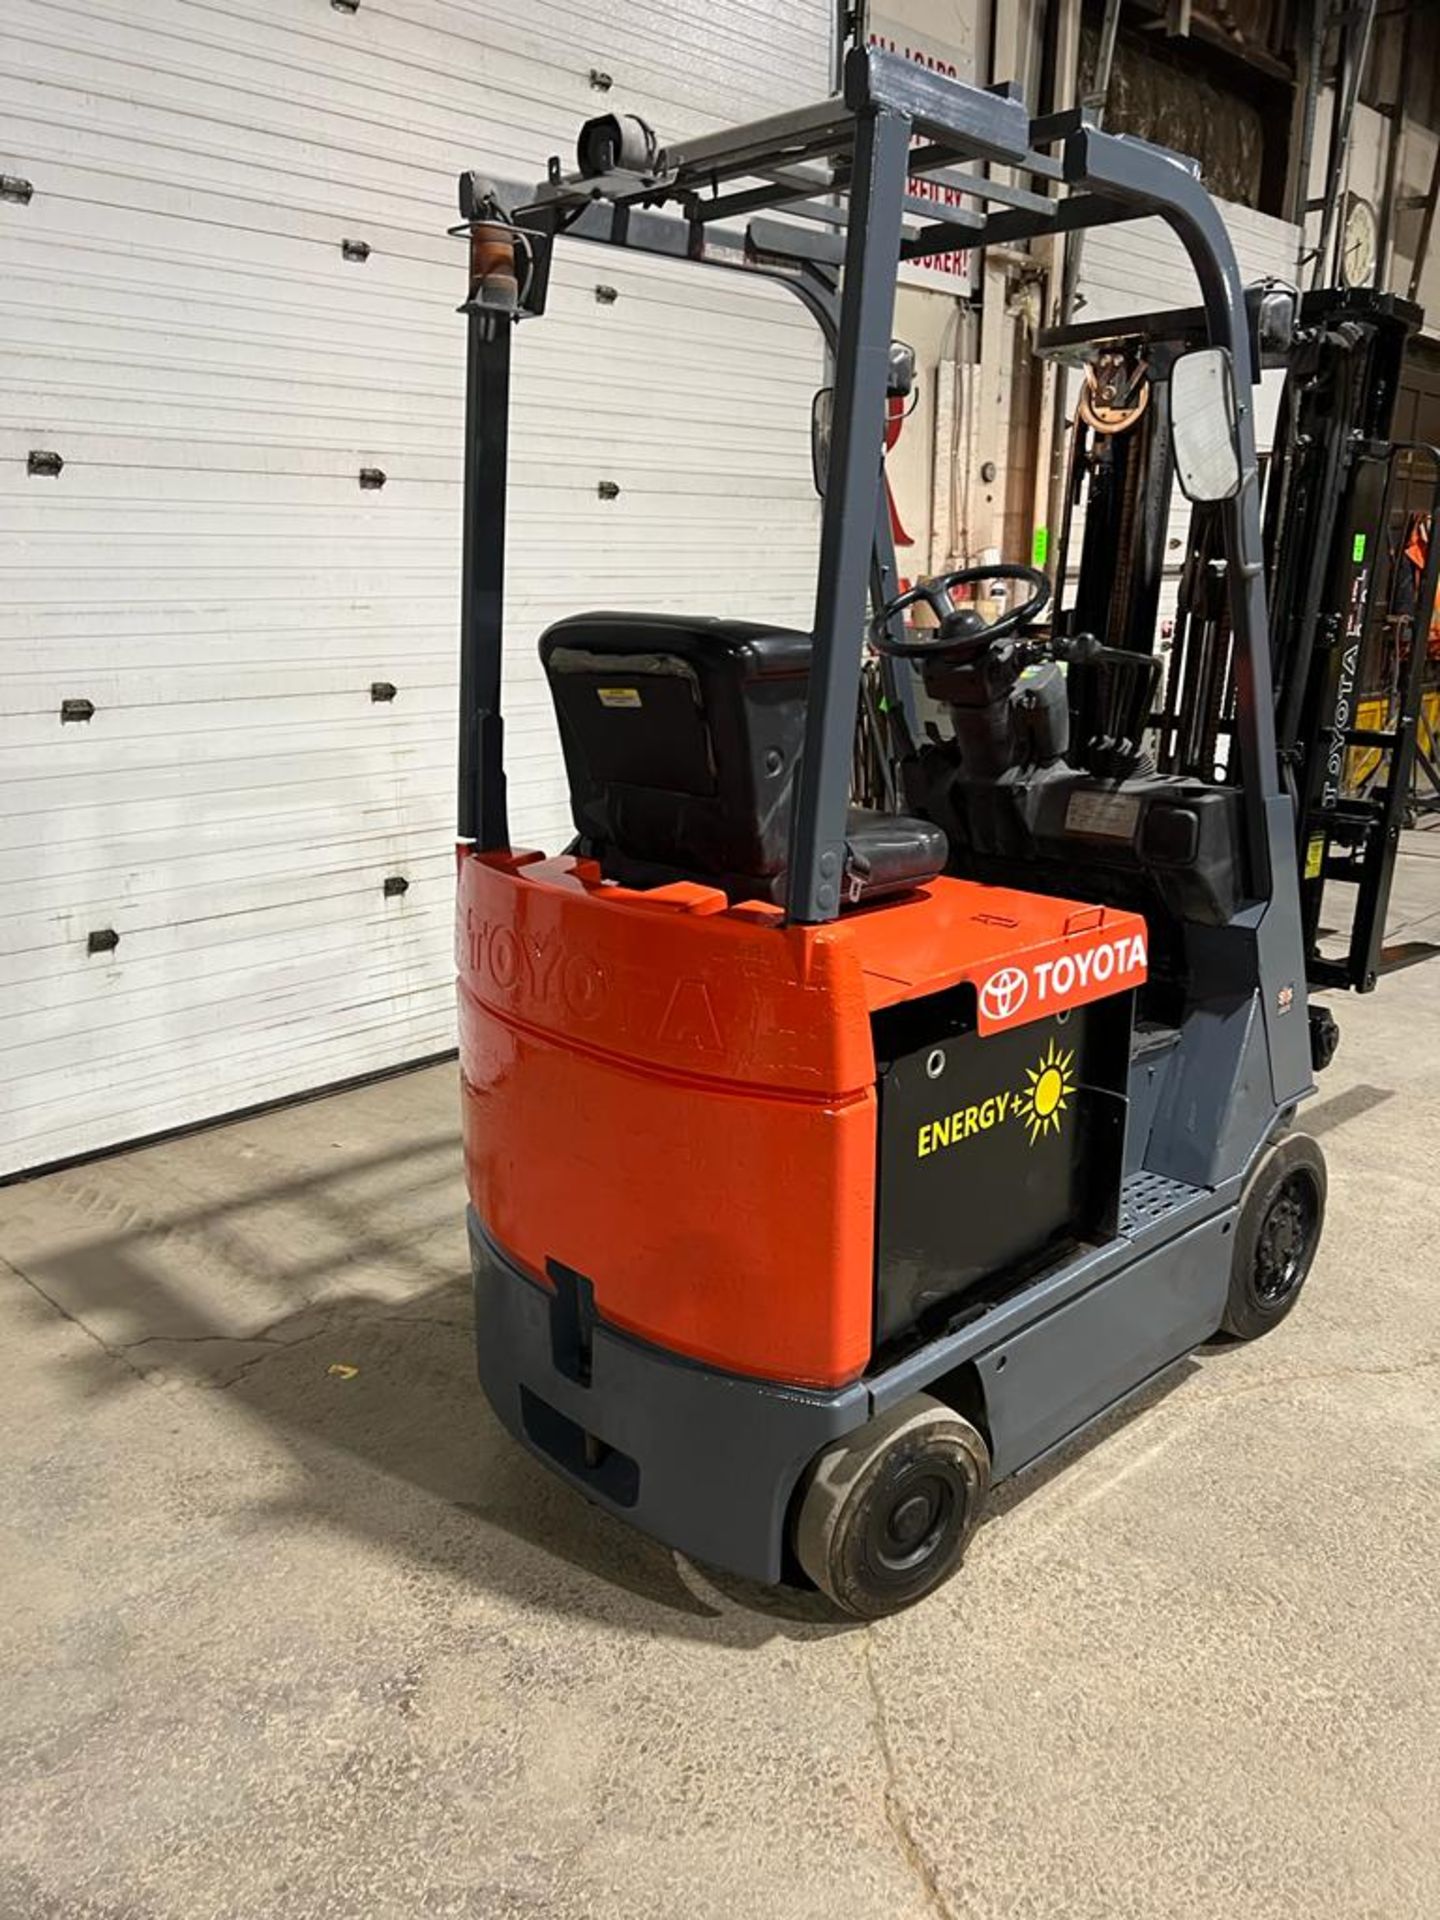 NICE Toyota 3,600lbs Capacity Forklift NEW 36V Battery with sideshift & 3-stage mast - FREE CUSTOMS - Image 3 of 4